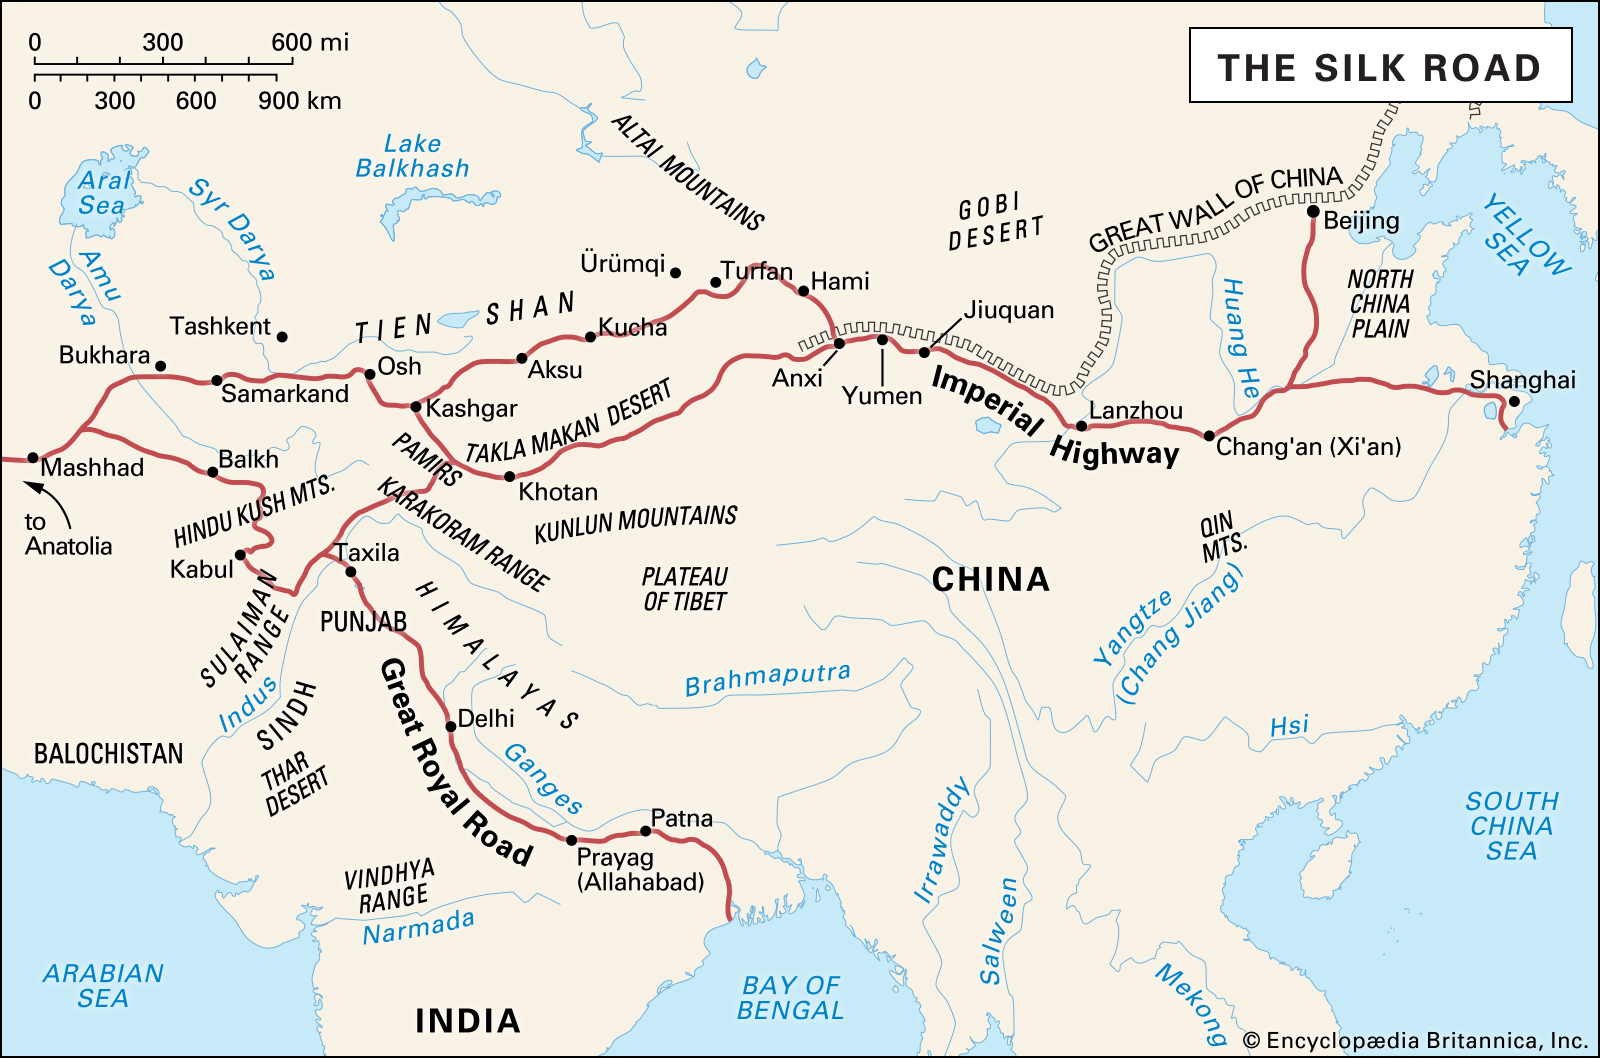 Cities on the Silk Road